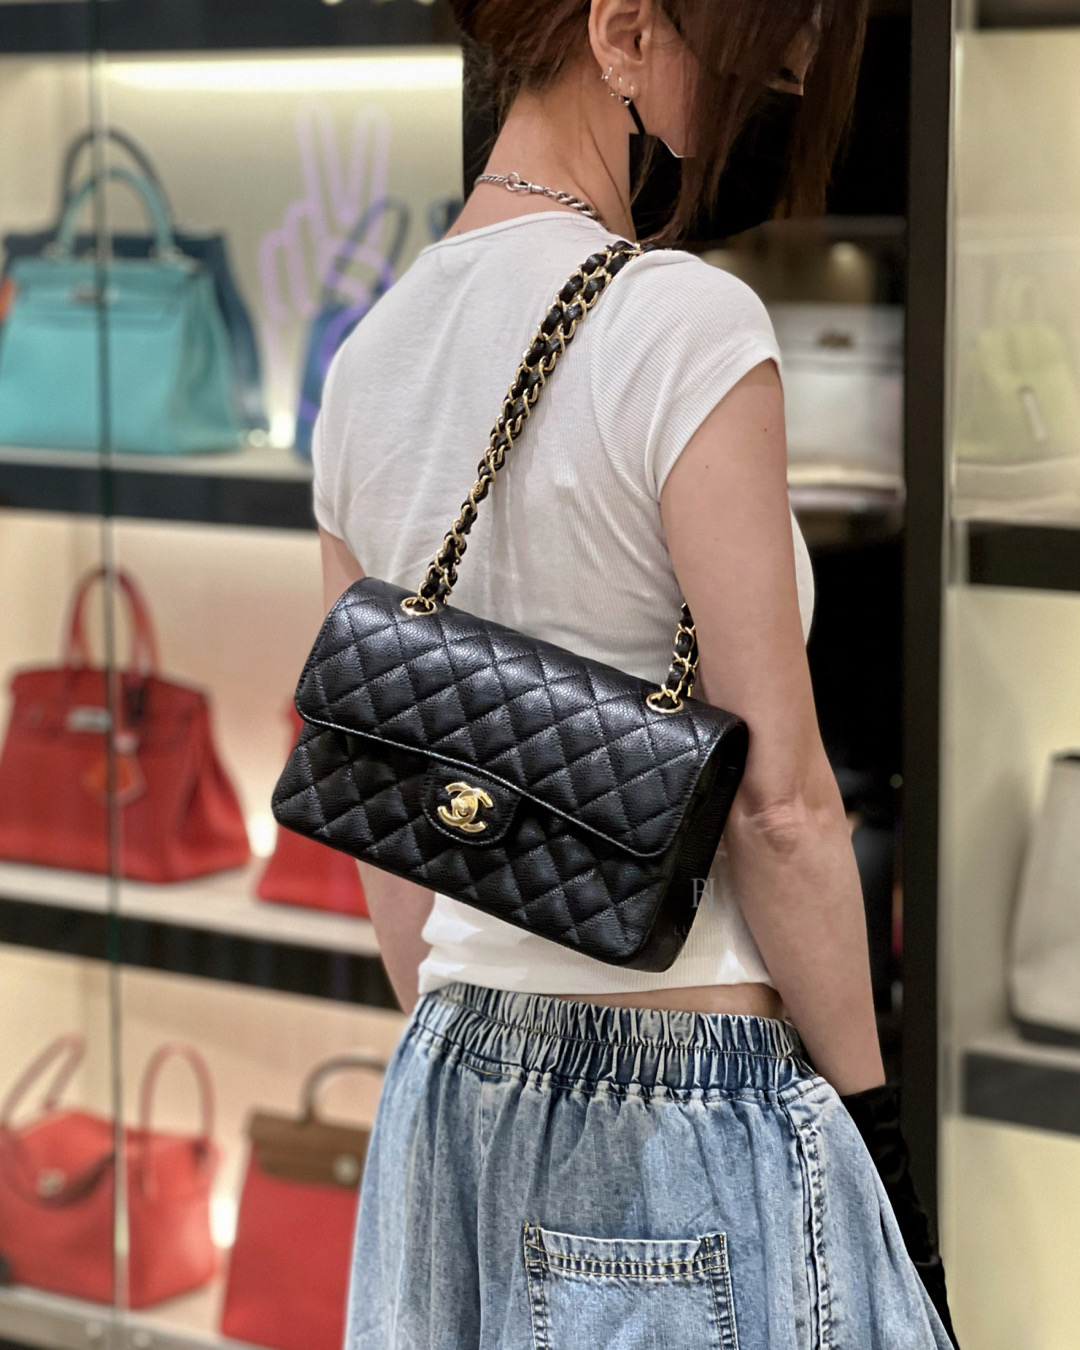 CHANEL 22C CRUISE COLLECTION REVIEW - HANDBAGS/SLGS  A NEW UNICORN, DENIM,  & LOTS OF CLASSIC FLAPS 